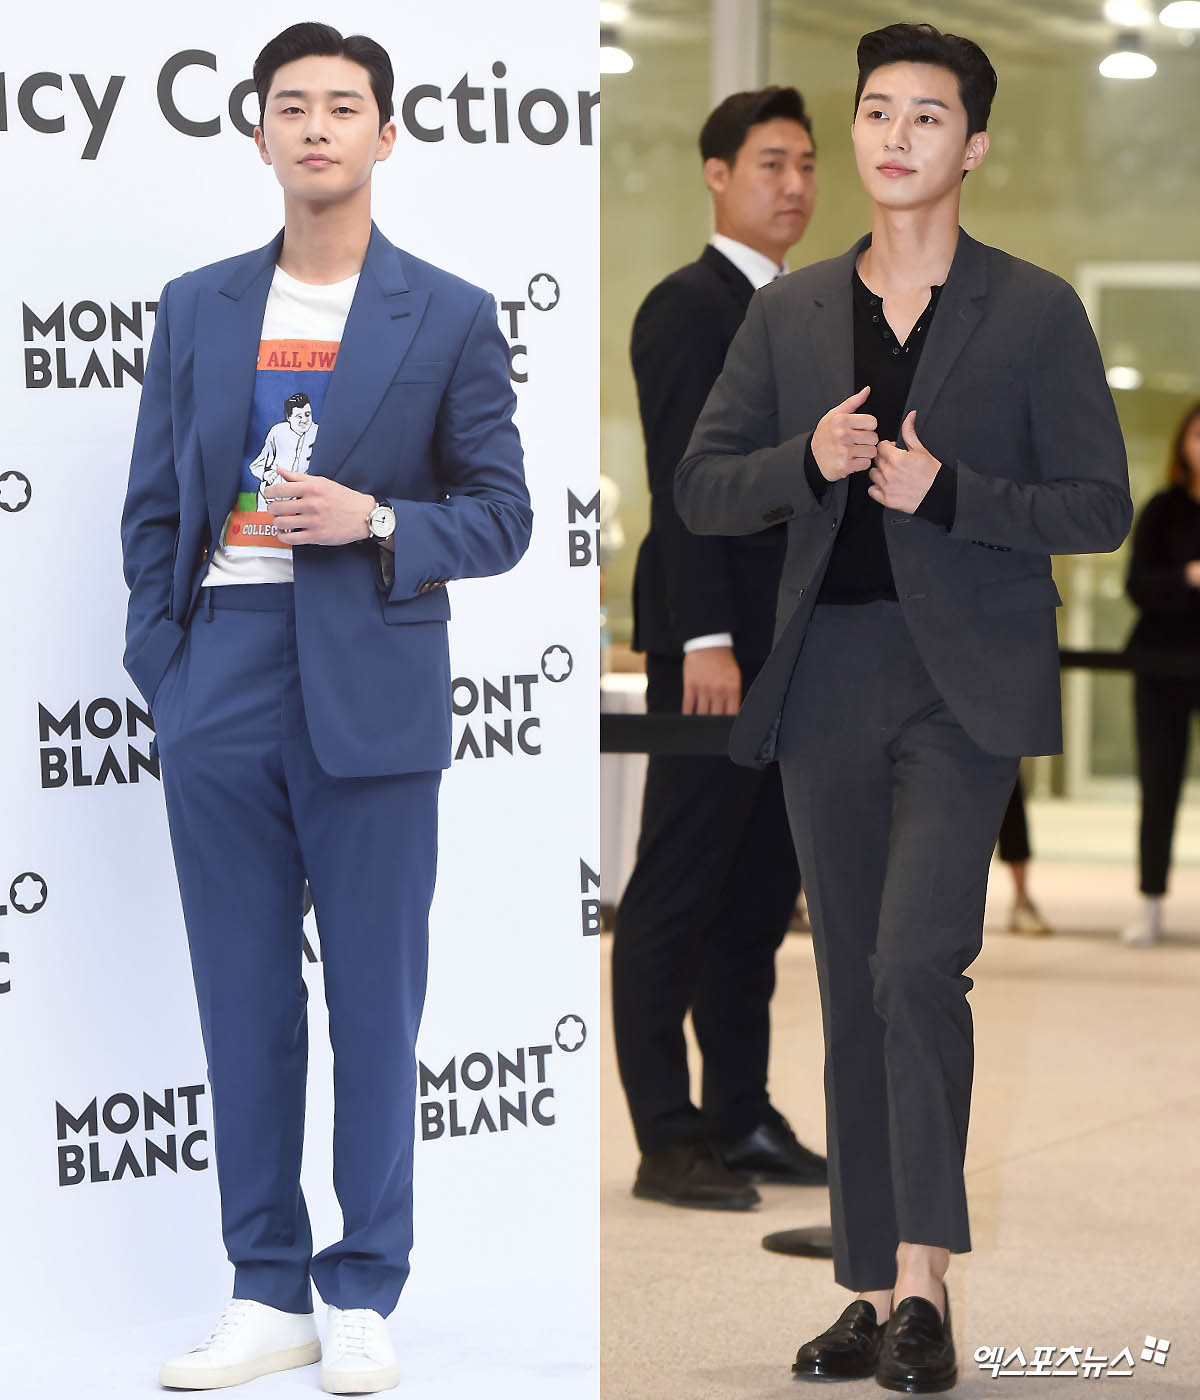 Park Seo-joon, who has recently performed as a single-night boss Bak Sae-roi in JTBCs Drama One Clath and is sweeping TV viewer ratings and topics.He has shown numerous fashions in the official ceremony: the fashion that maximizes the coolness of Park Seo-joon, who has a warm appearance and a height of 185 centimeters and a sculpture-like figure, is also a suit.I gathered the suit fashion worn in the official appearance of Park Seo-joon, which showed a tight suit fit as if showing that the completion of fashion is body.